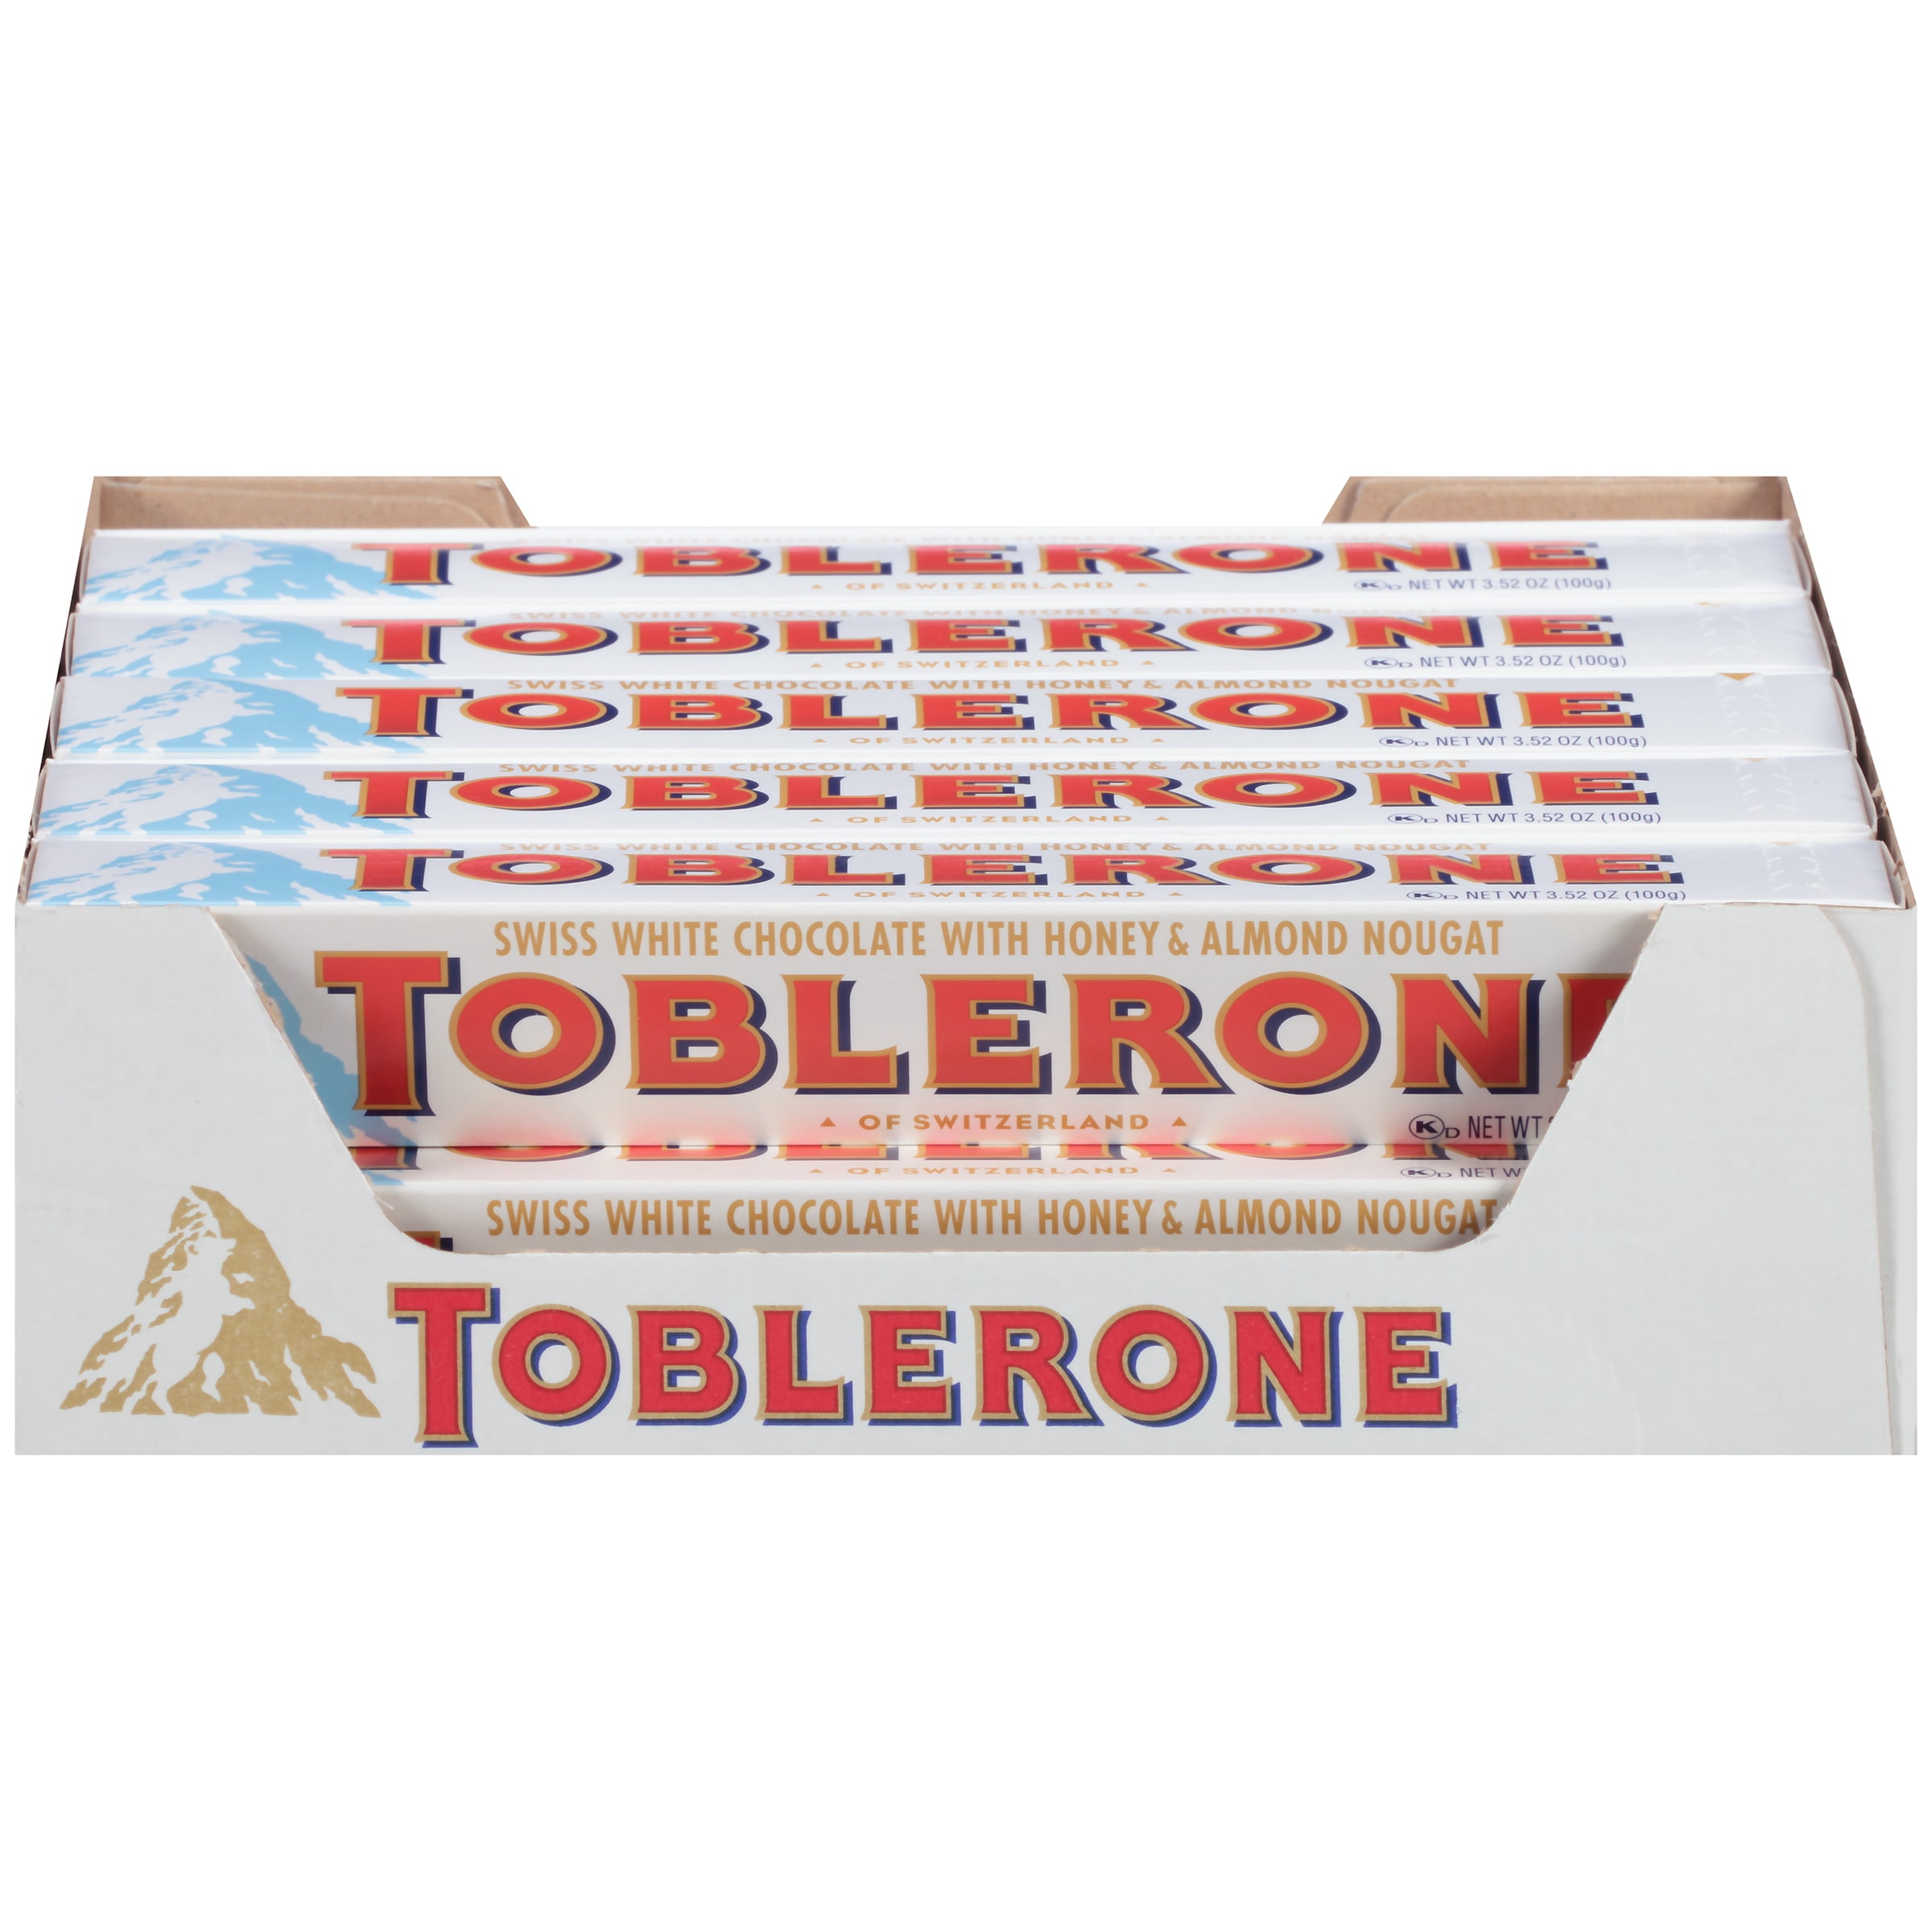  Toblerone Milk Chocolate, 100g (3.52 oz.) : Candy And Chocolate  Bars : Grocery & Gourmet Food